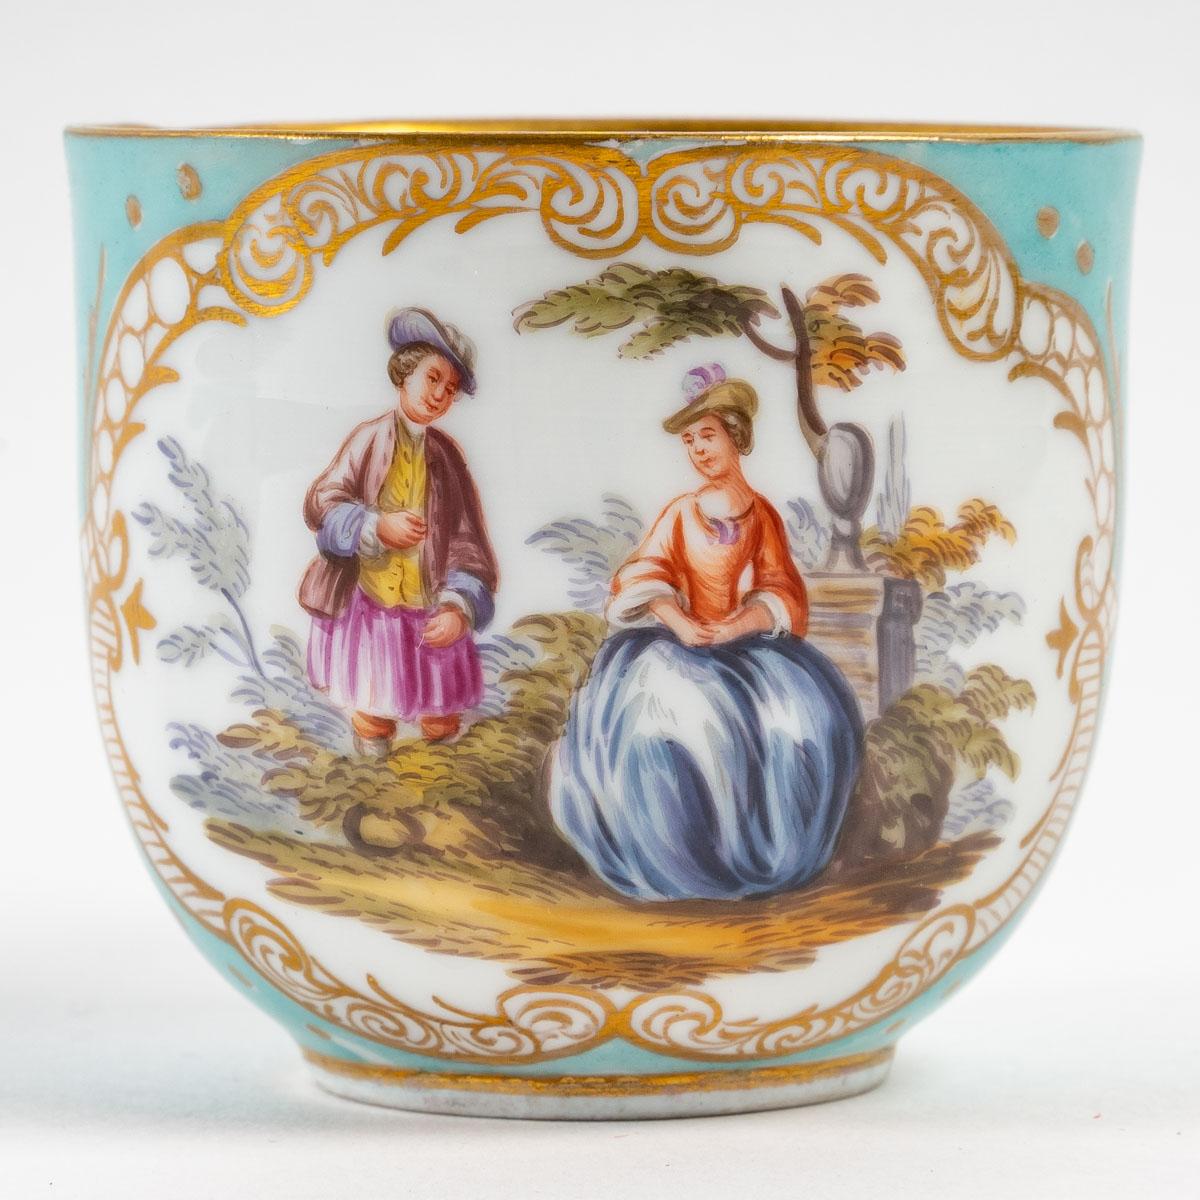 German Porcelain Service and Its Meissen Tray, 19th Century